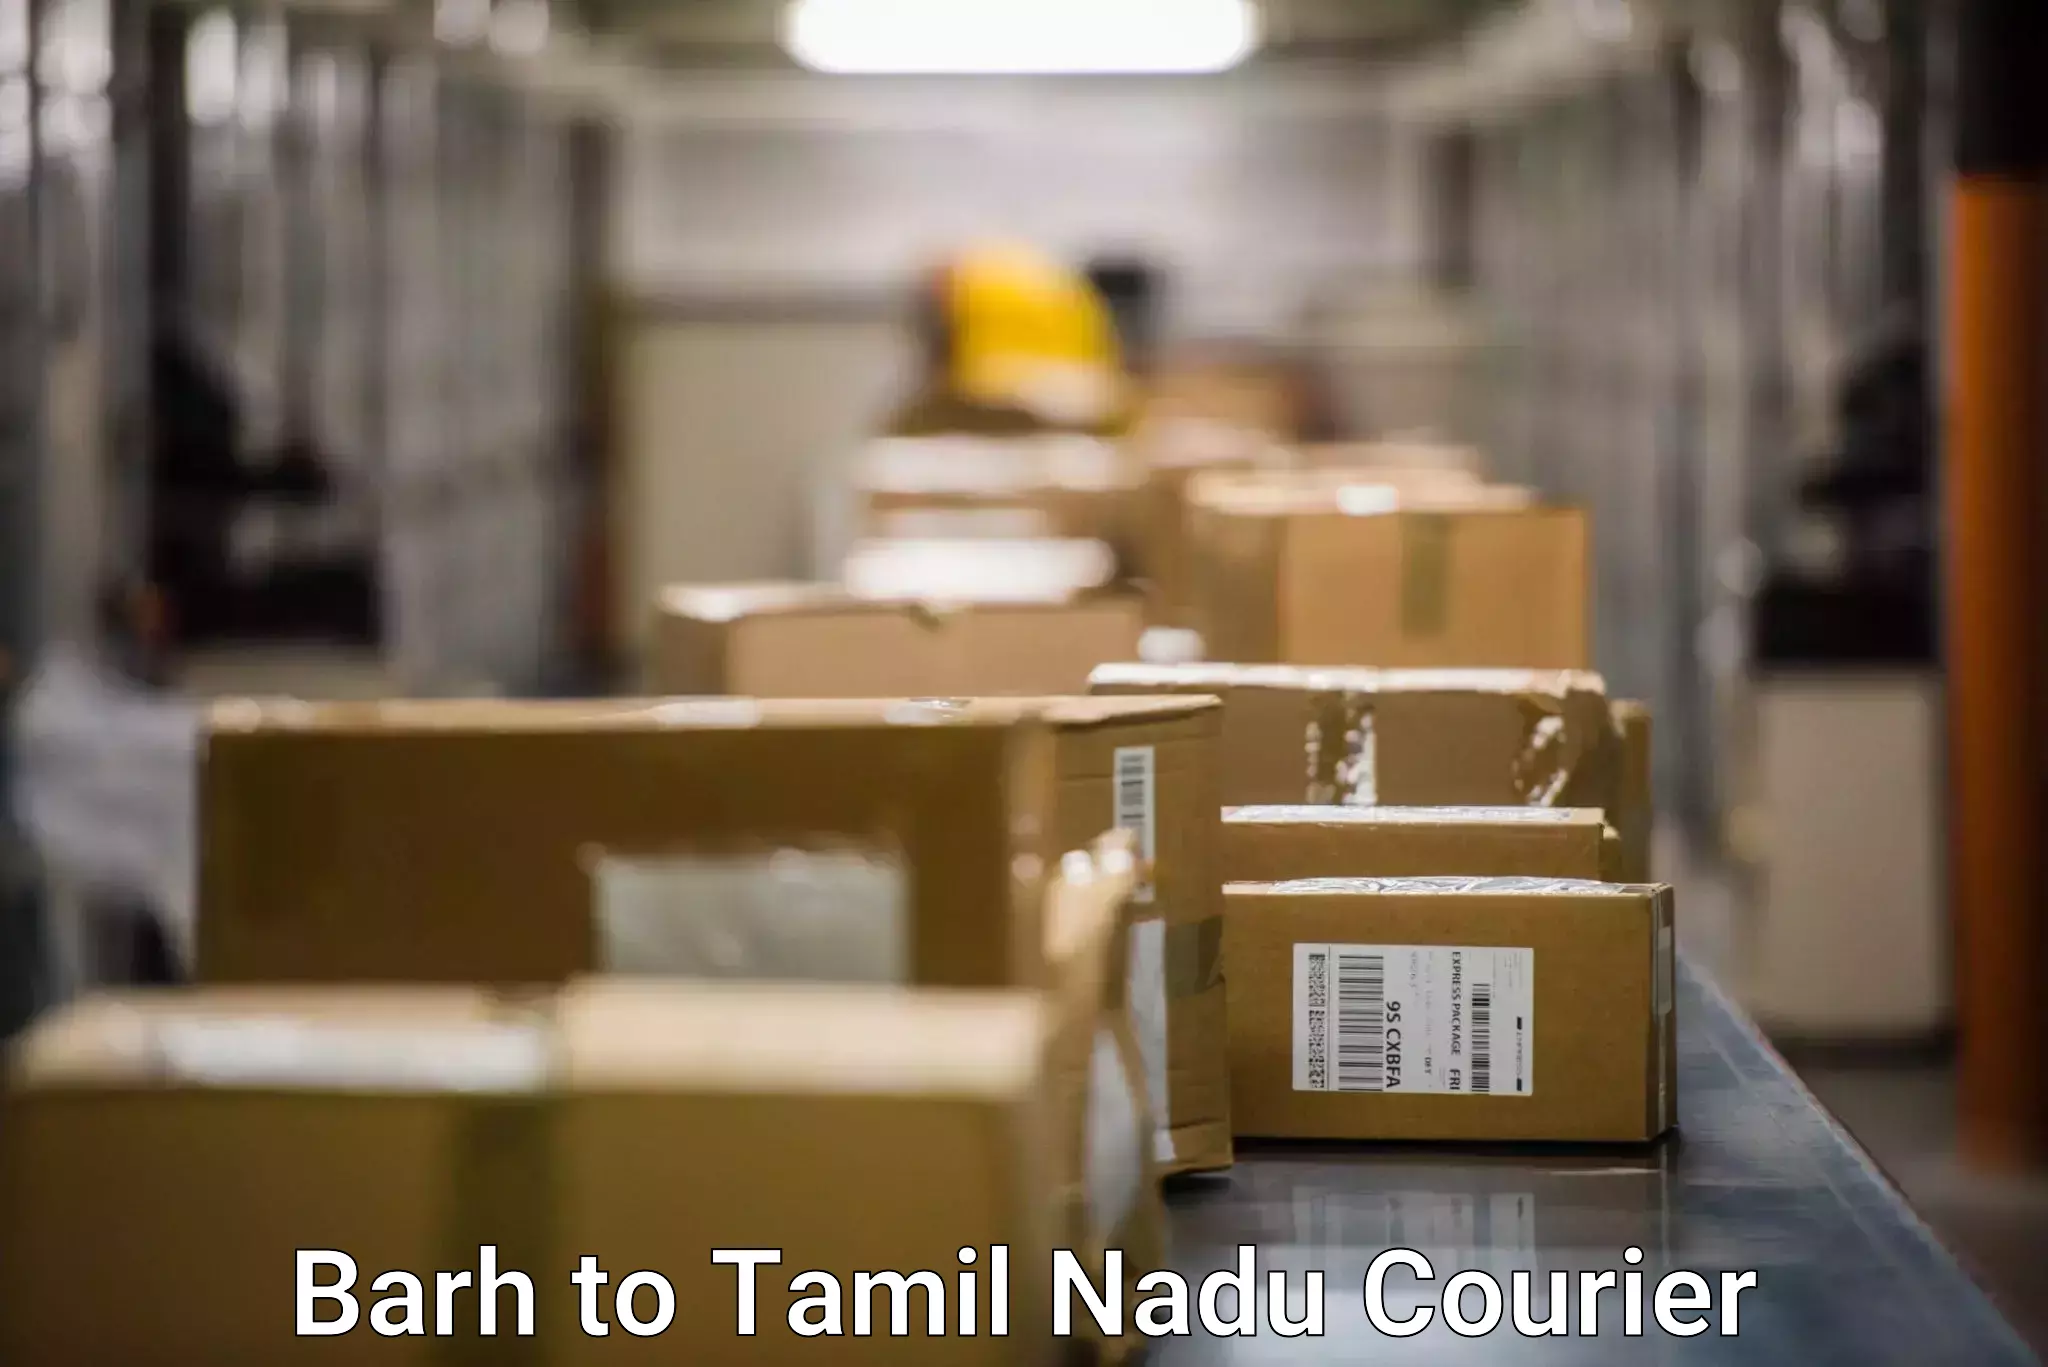 International courier networks Barh to Chennai